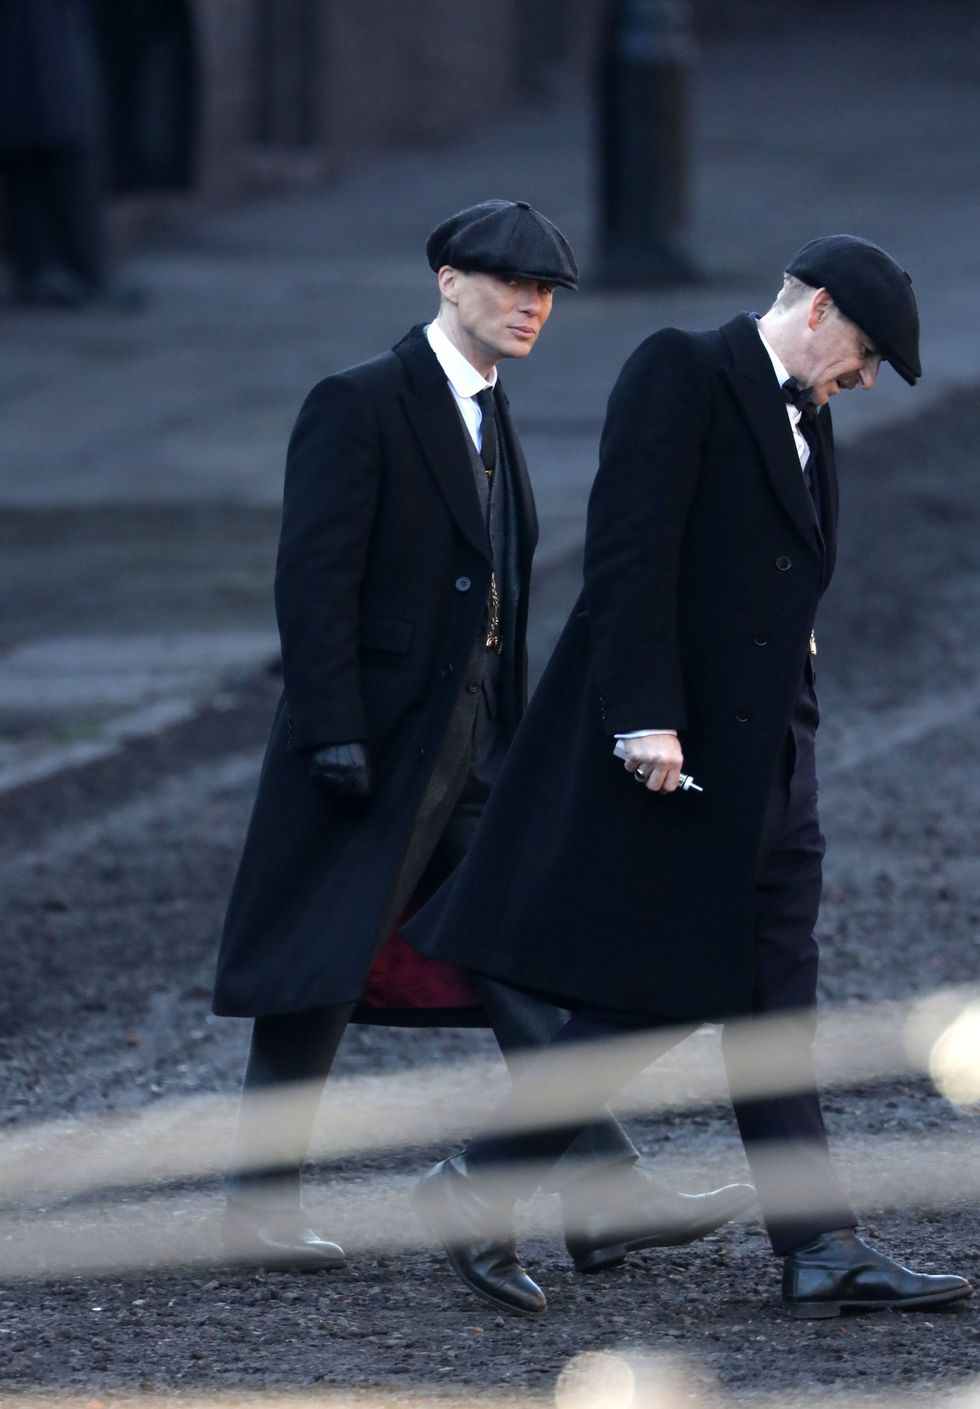 Cillian Murphy is seen as Thomas Shelby today on set in Liverpool as filming got underway for the new series of the hit BBC 'Peaky Blinders' drama. 20 March 2017